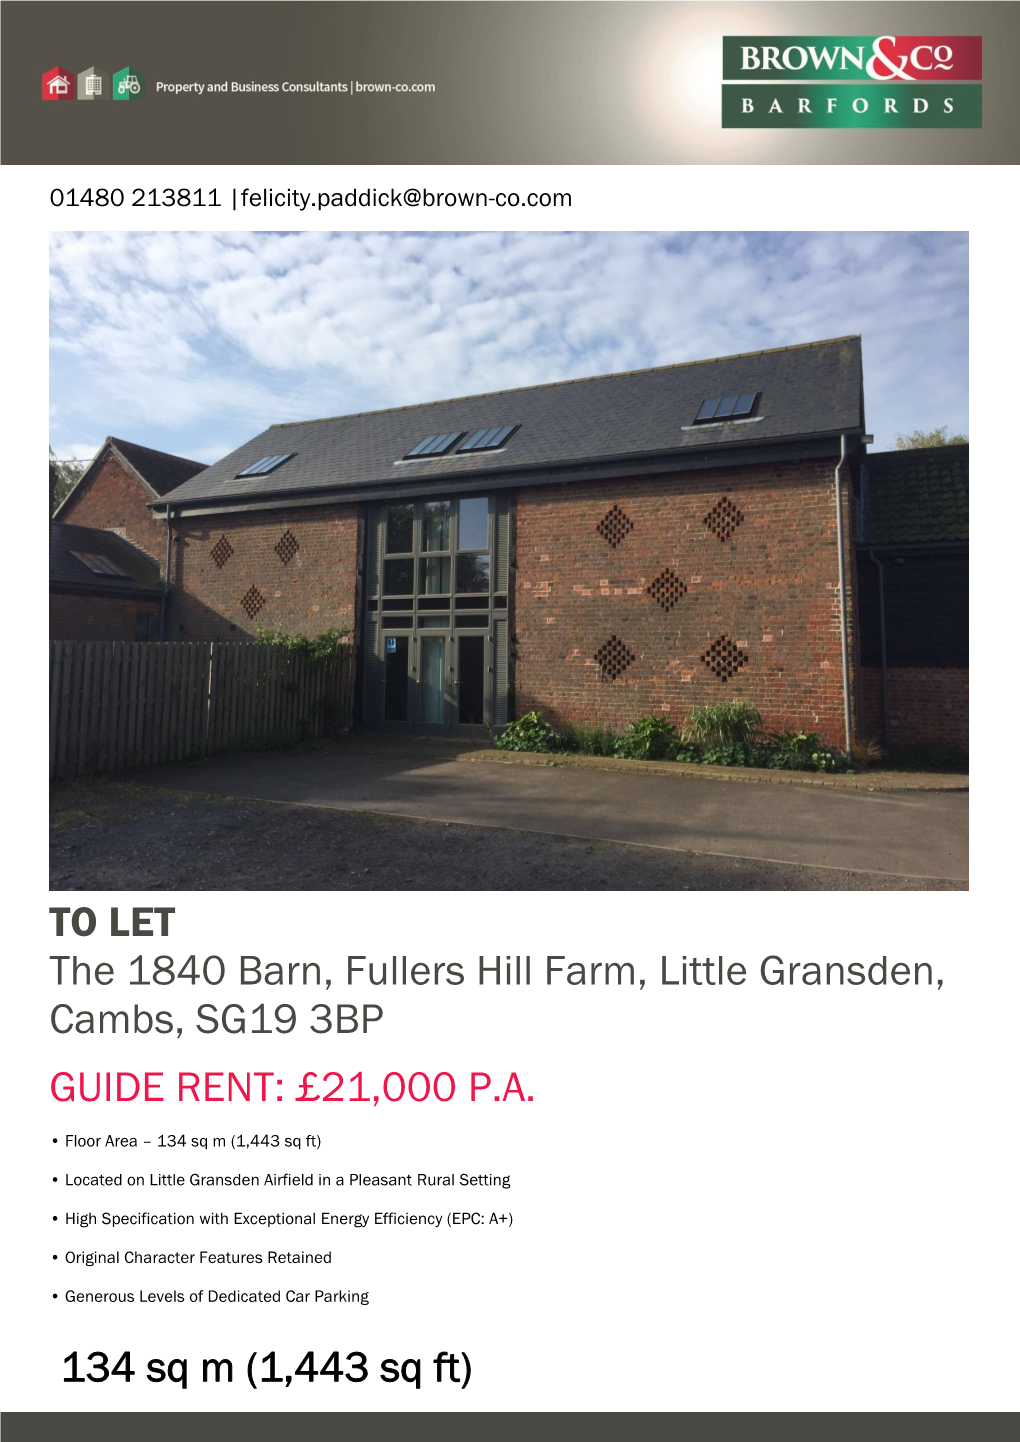 TO LET the 1840 Barn, Fullers Hill Farm, Little Gransden, Cambs, SG19 3BP